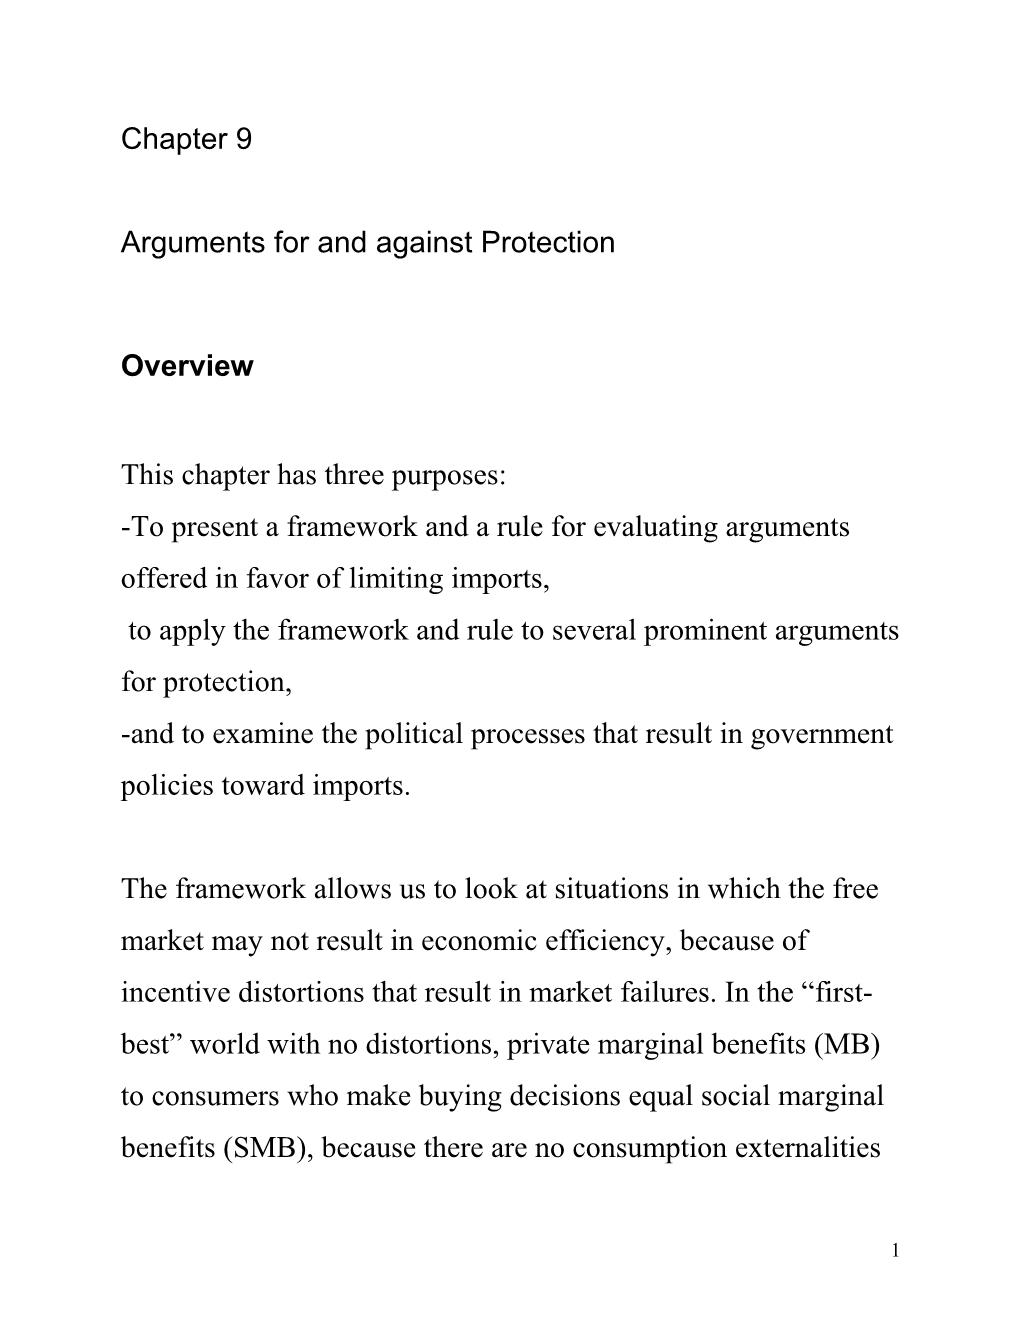 Arguments for and Against Protection